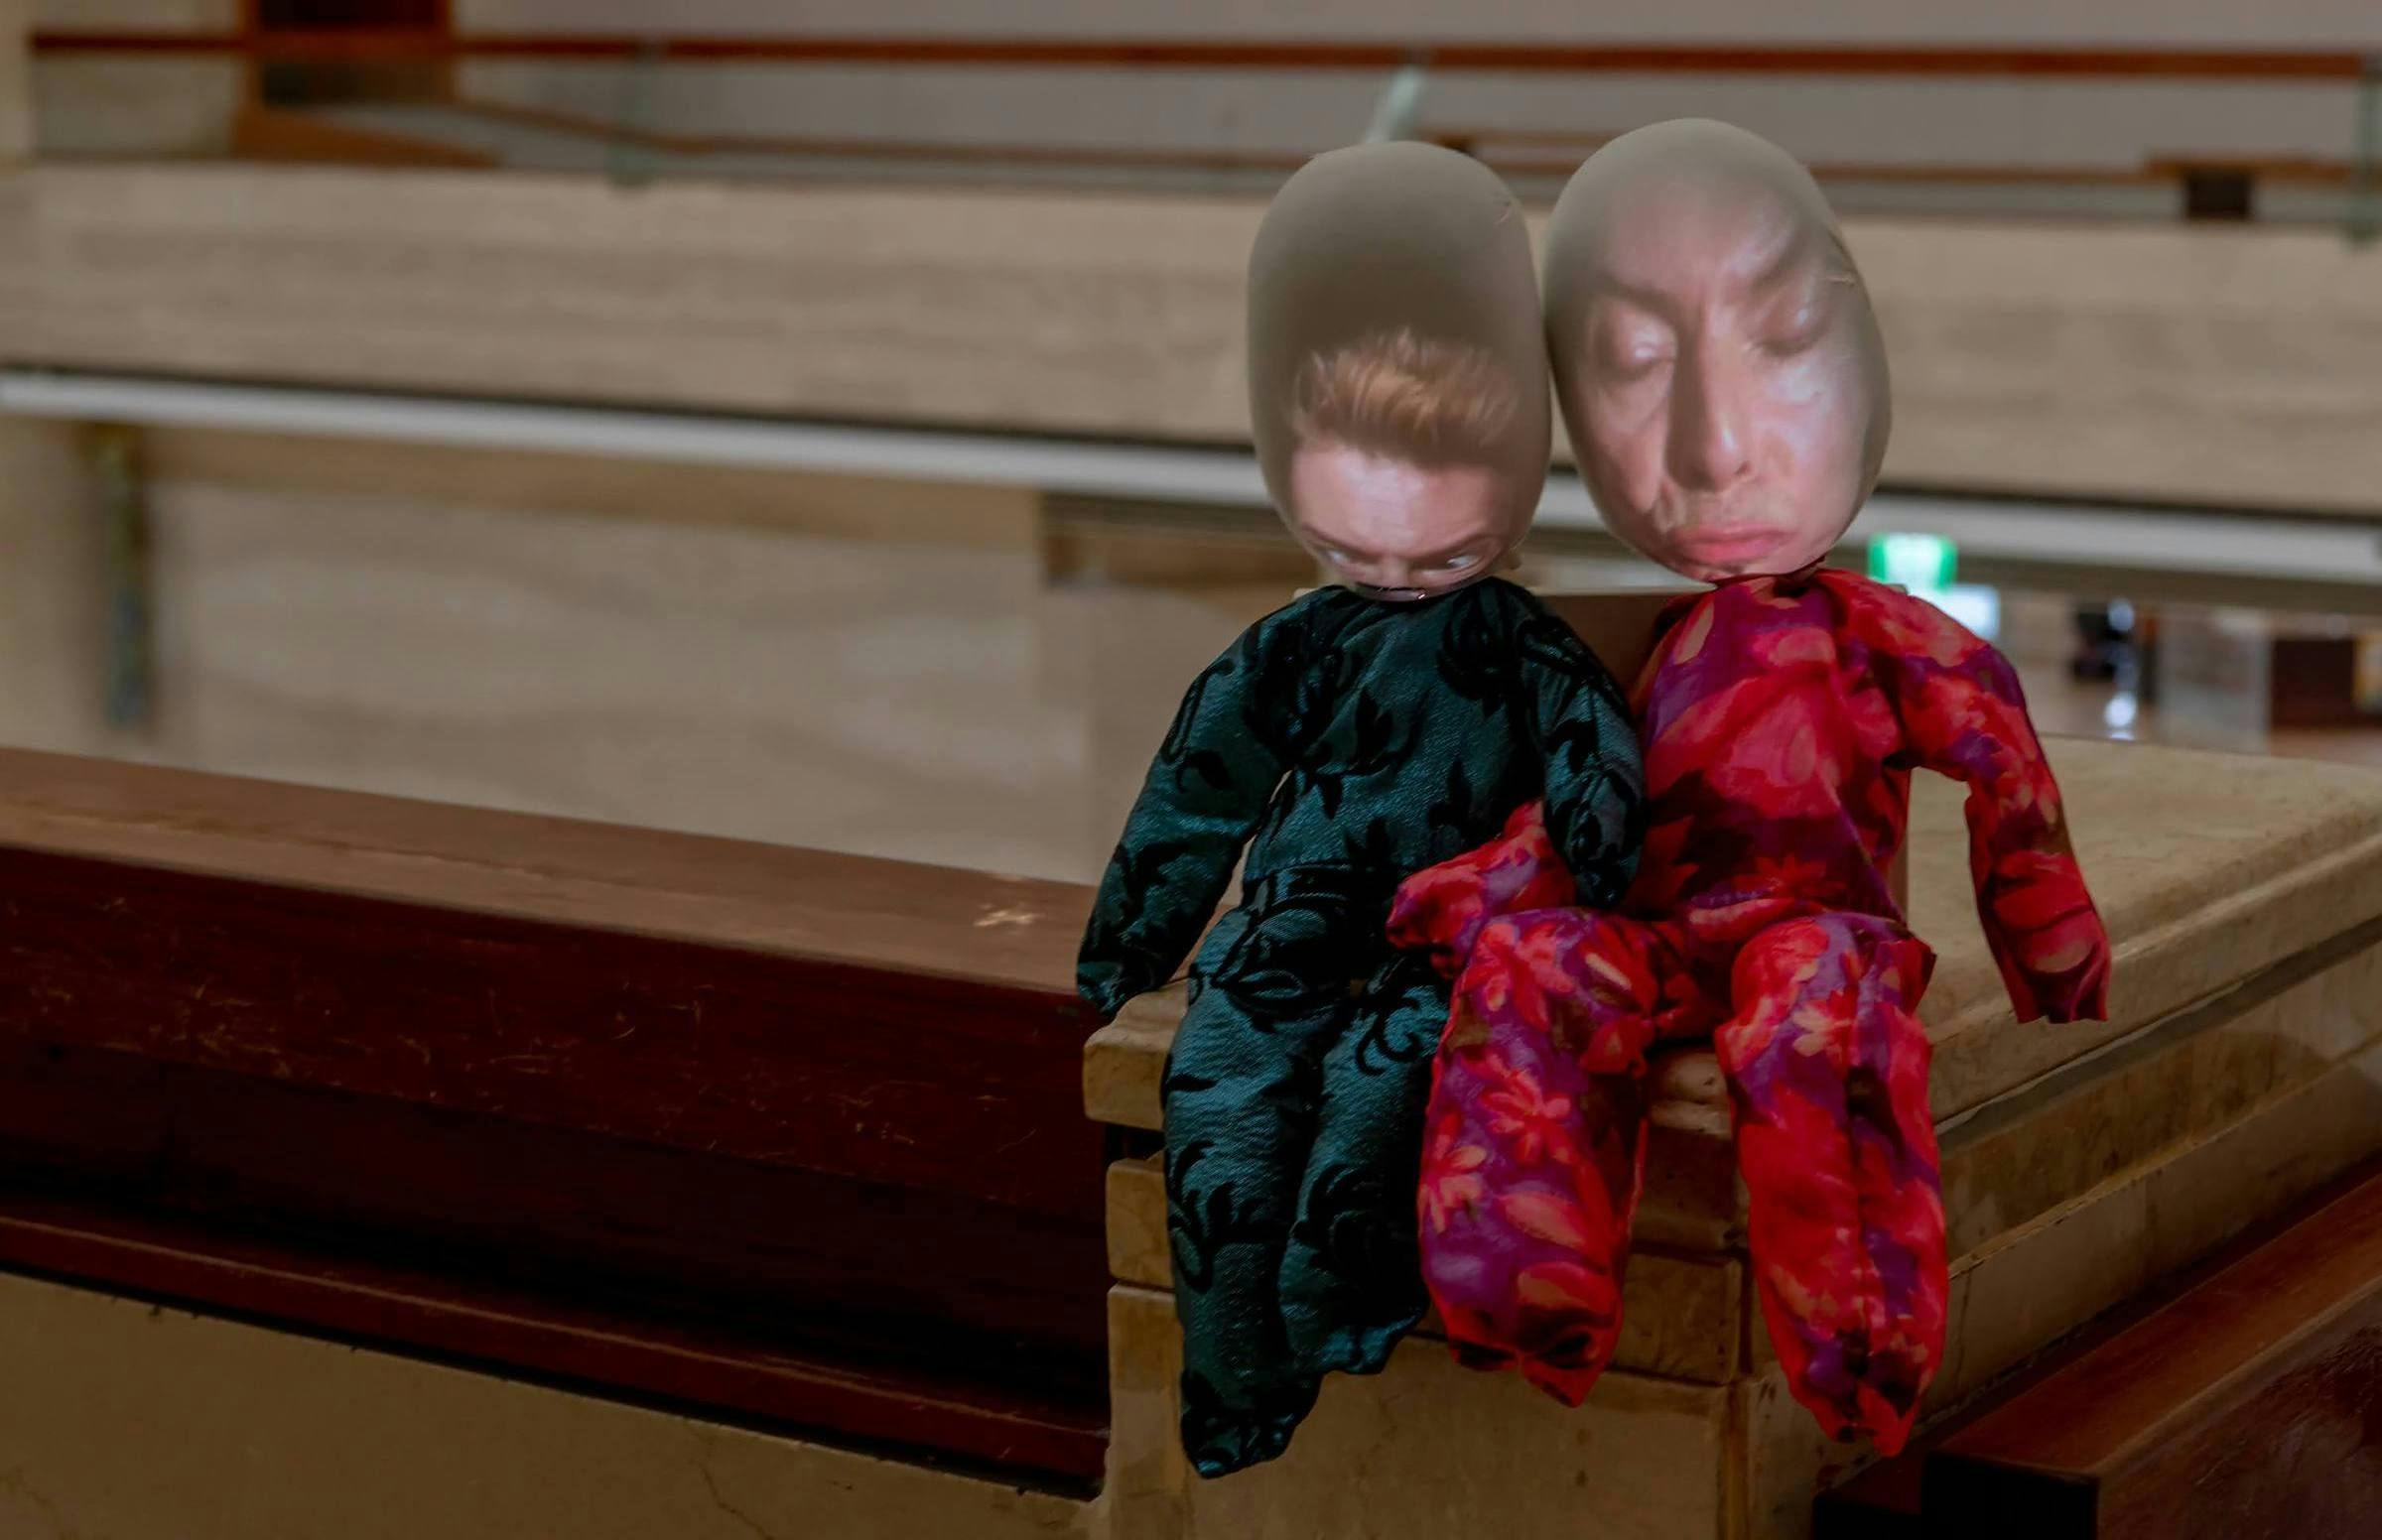 an image of db an art work that comprises 2 dolls. The dolls have the faces of David Bowie projected on to them and the projector is visible. The dolls are installed on the top of a stairwell of a marble and grand building interior